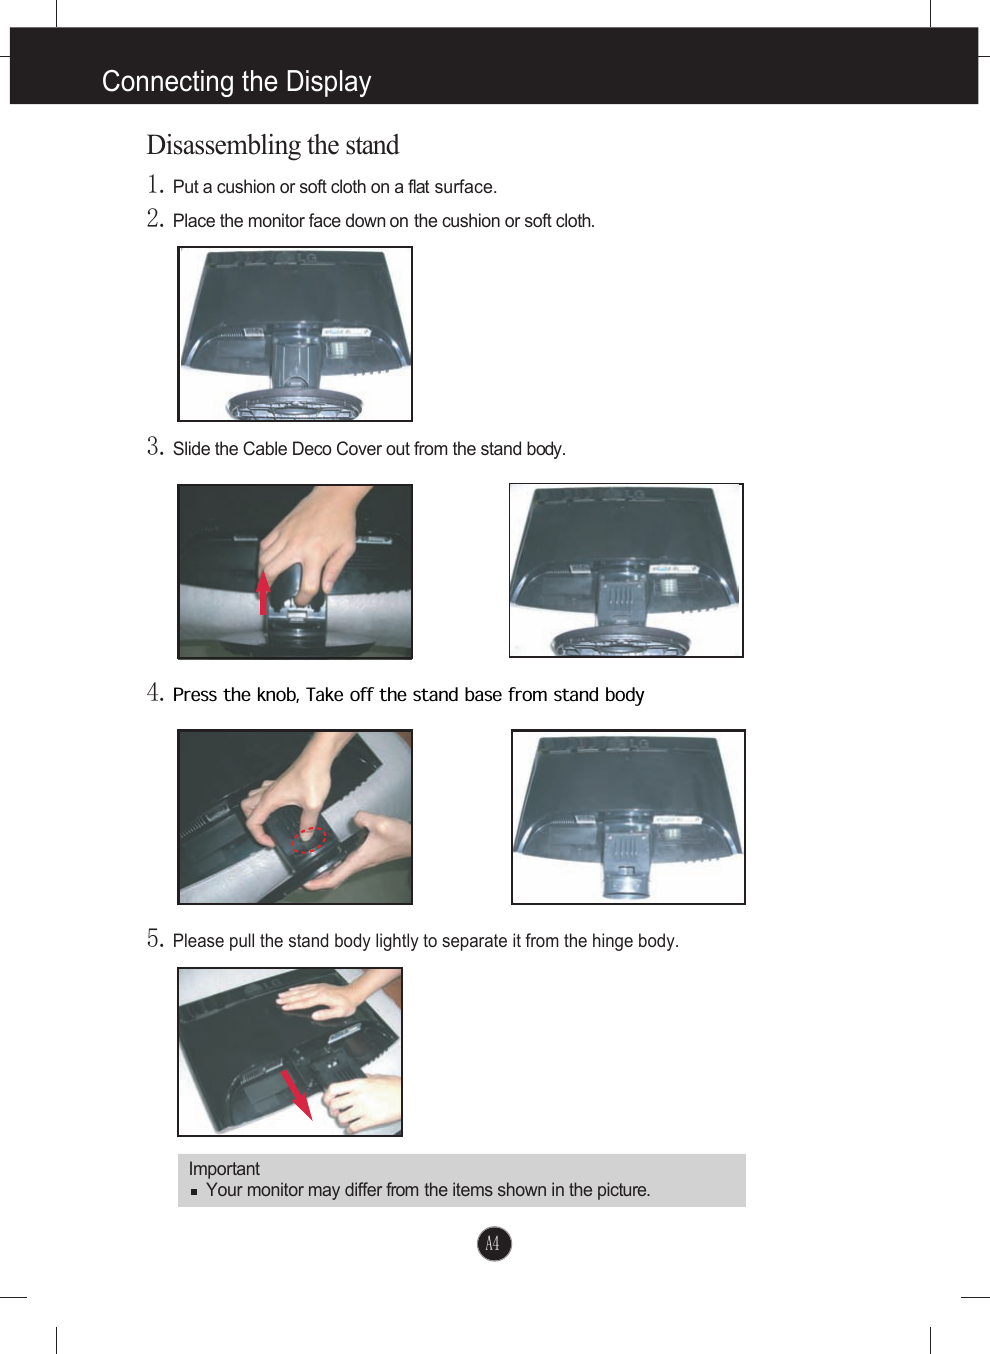 A4ImportantYour monitor may differ from the items shown in the picture.Disassembling the stand1.Put a cushion or soft cloth on a flat surface.4.Press the knob, Take off the stand base from stand body5.Please pull the stand body lightly to separate it from the hinge body. 2.Place the monitor face down on the cushion or soft cloth.3.Slide the Cable Deco Cover out from the stand body.Connecting the Display